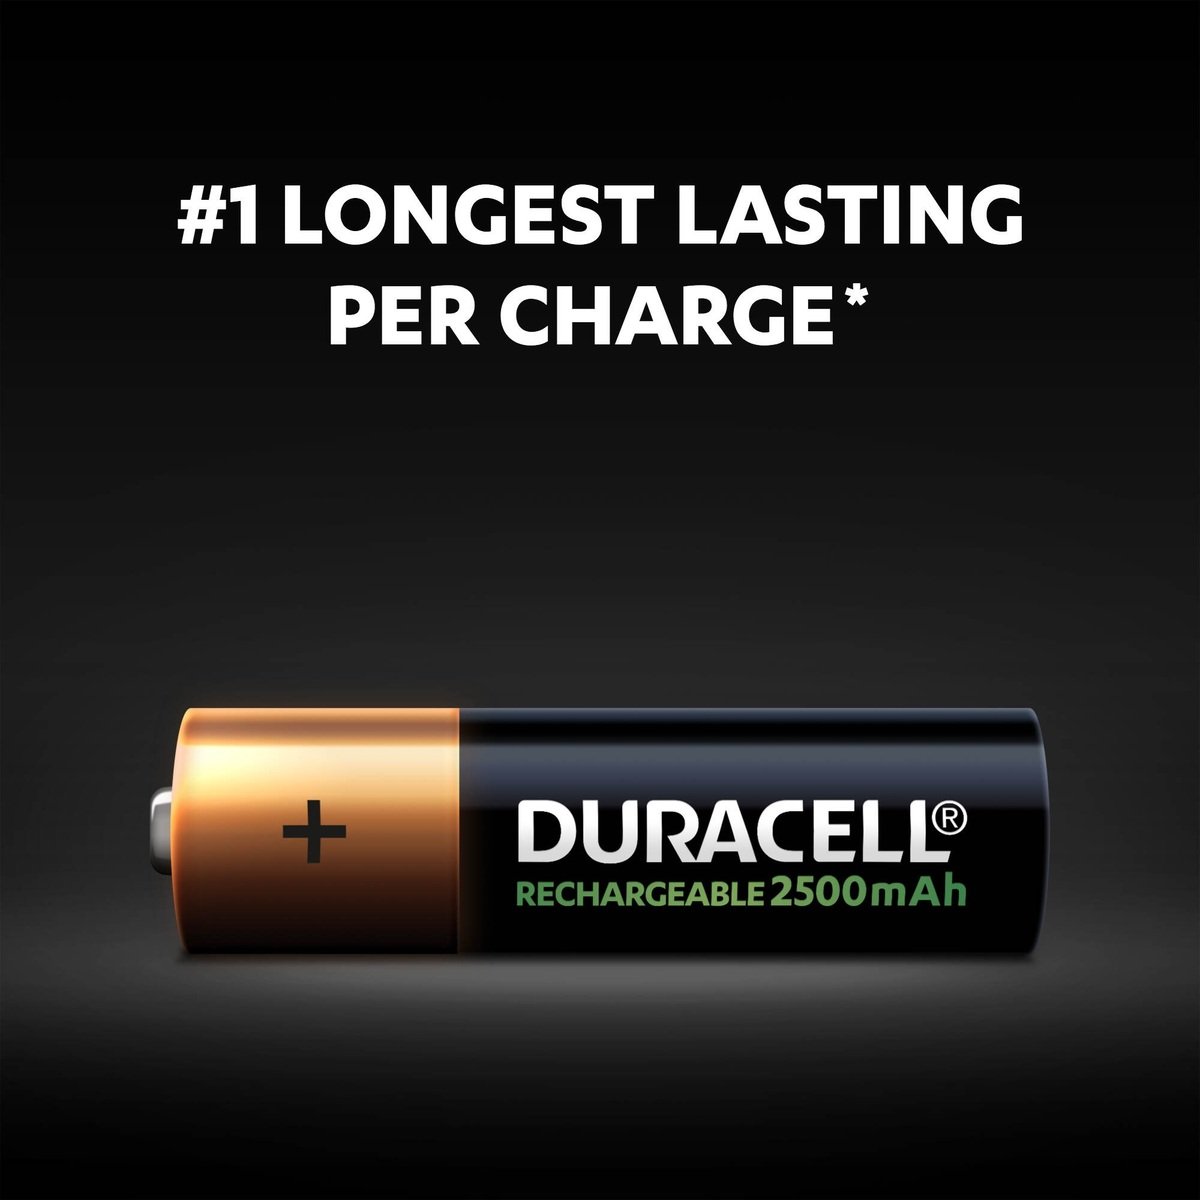 Duracell Rechargeable AA 2500mAh batteries, pack of 4